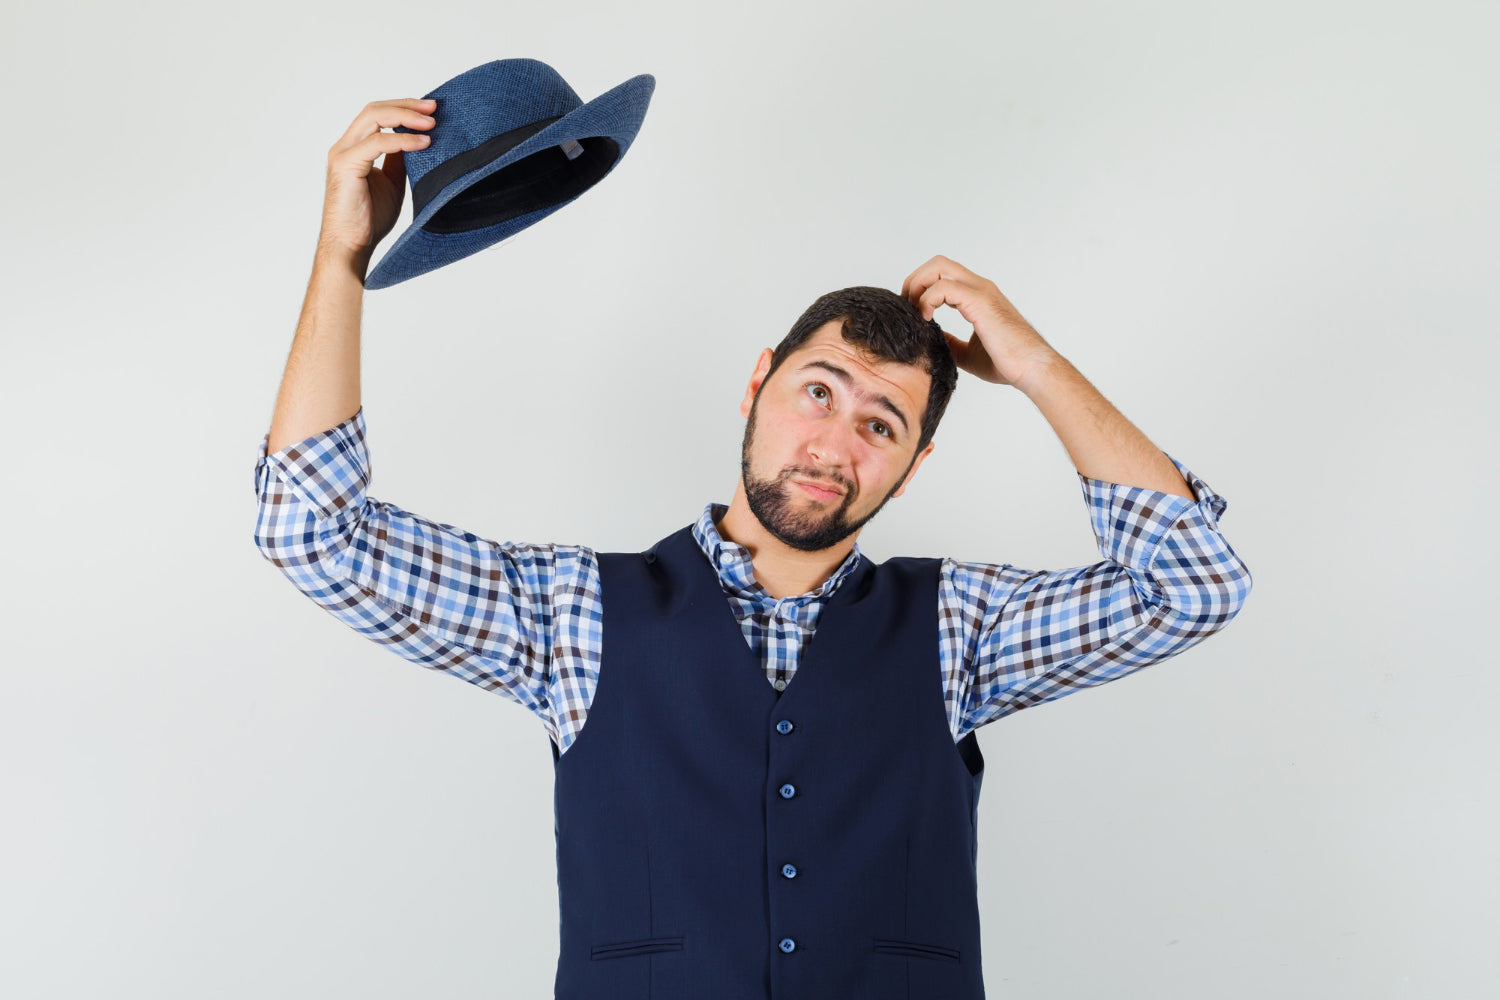 Wearing hats causes hair loss in men